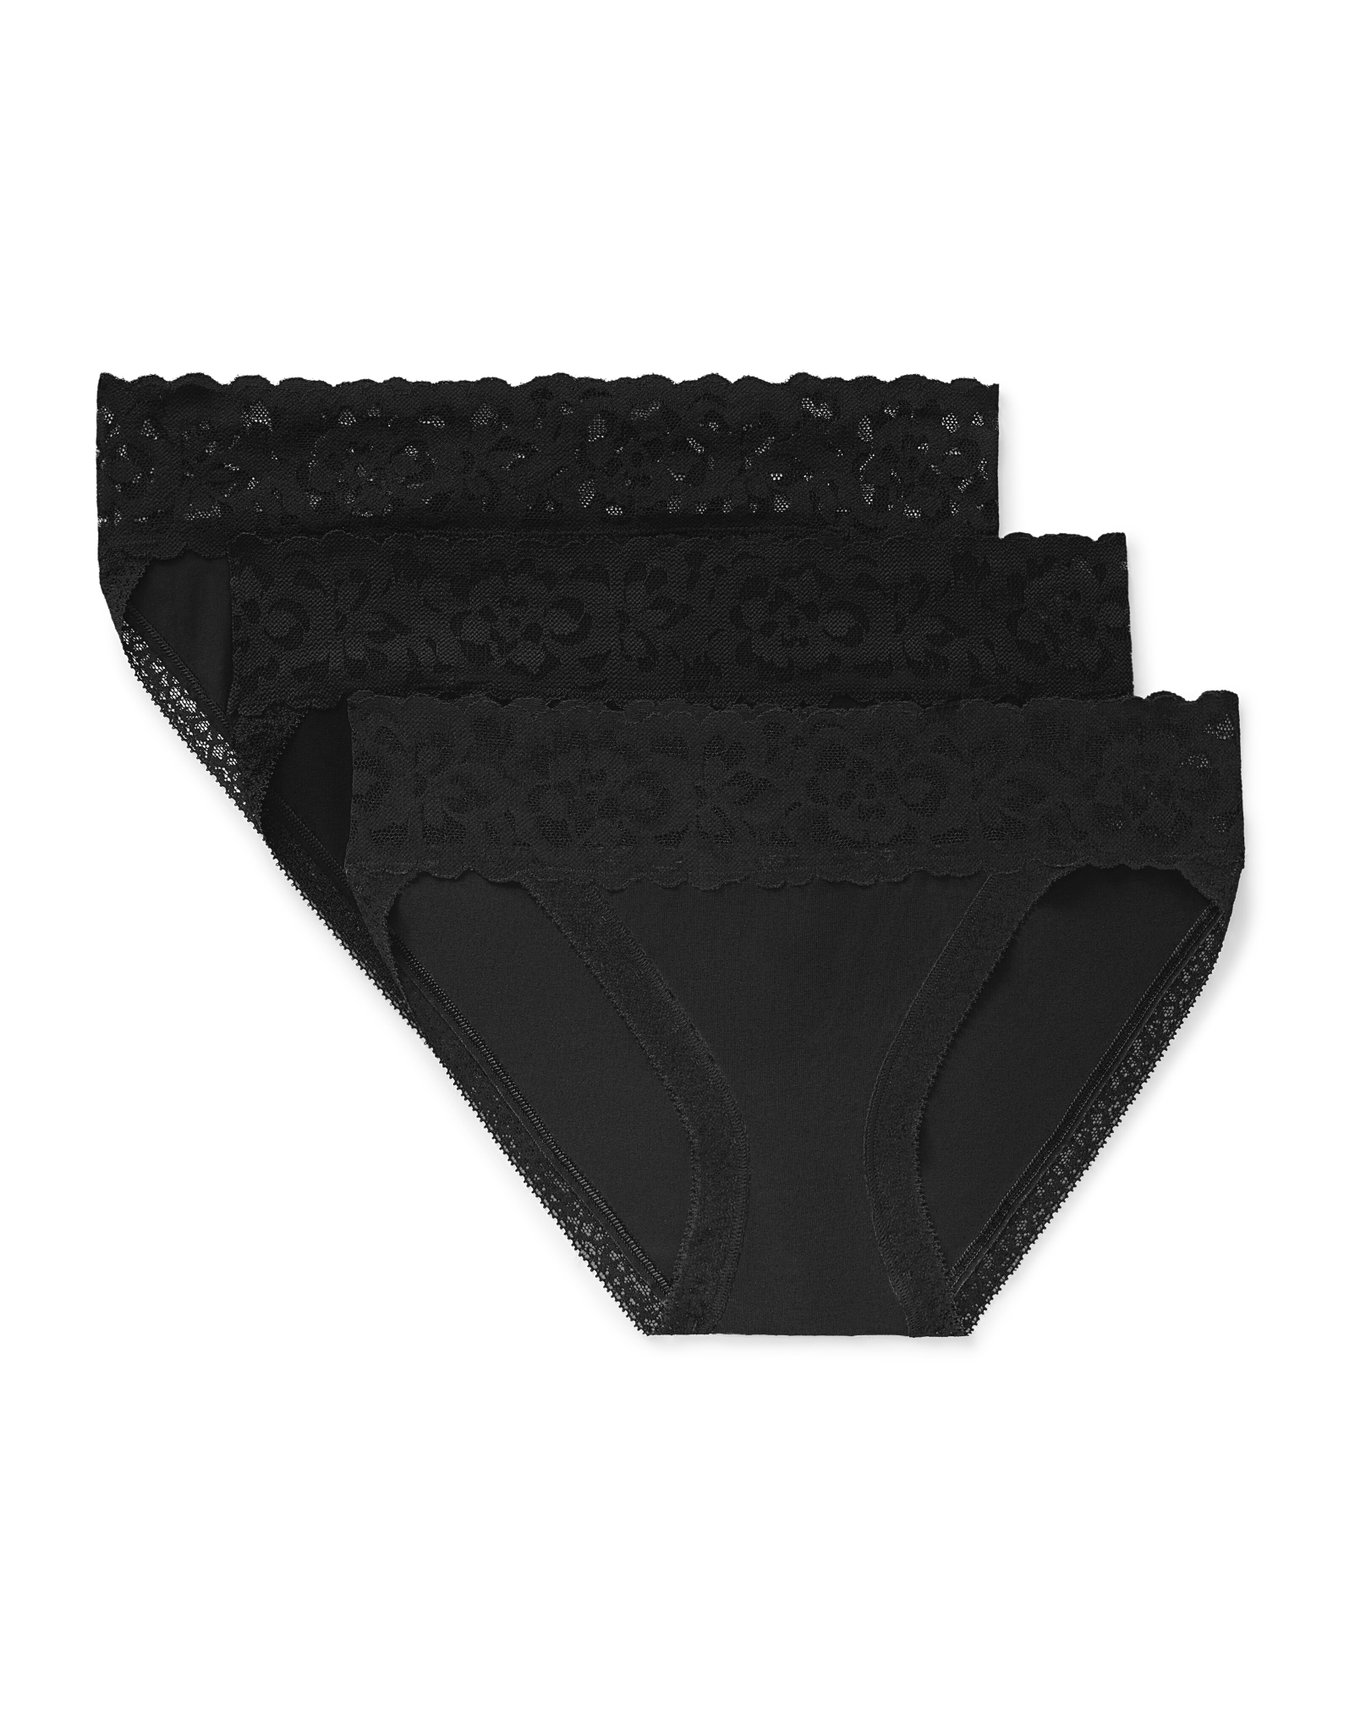 Women's Briefs & Knickers, Lace, Pack of 2